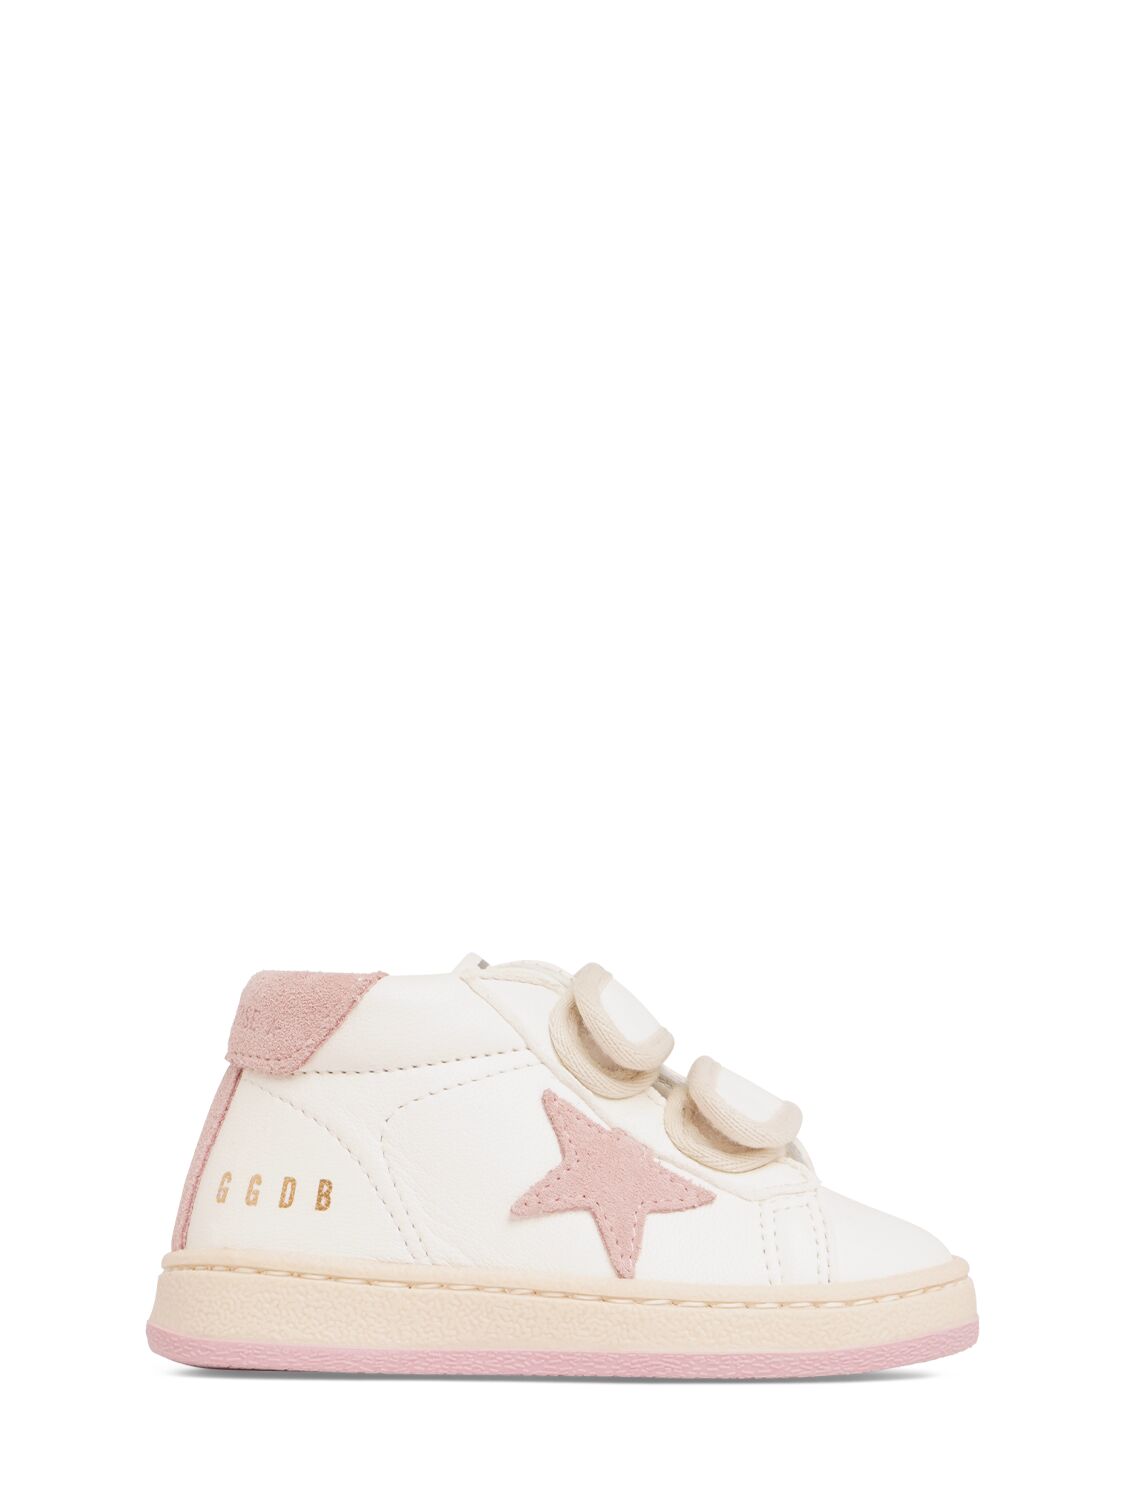 Image of June Strap Leather Star Sneakers